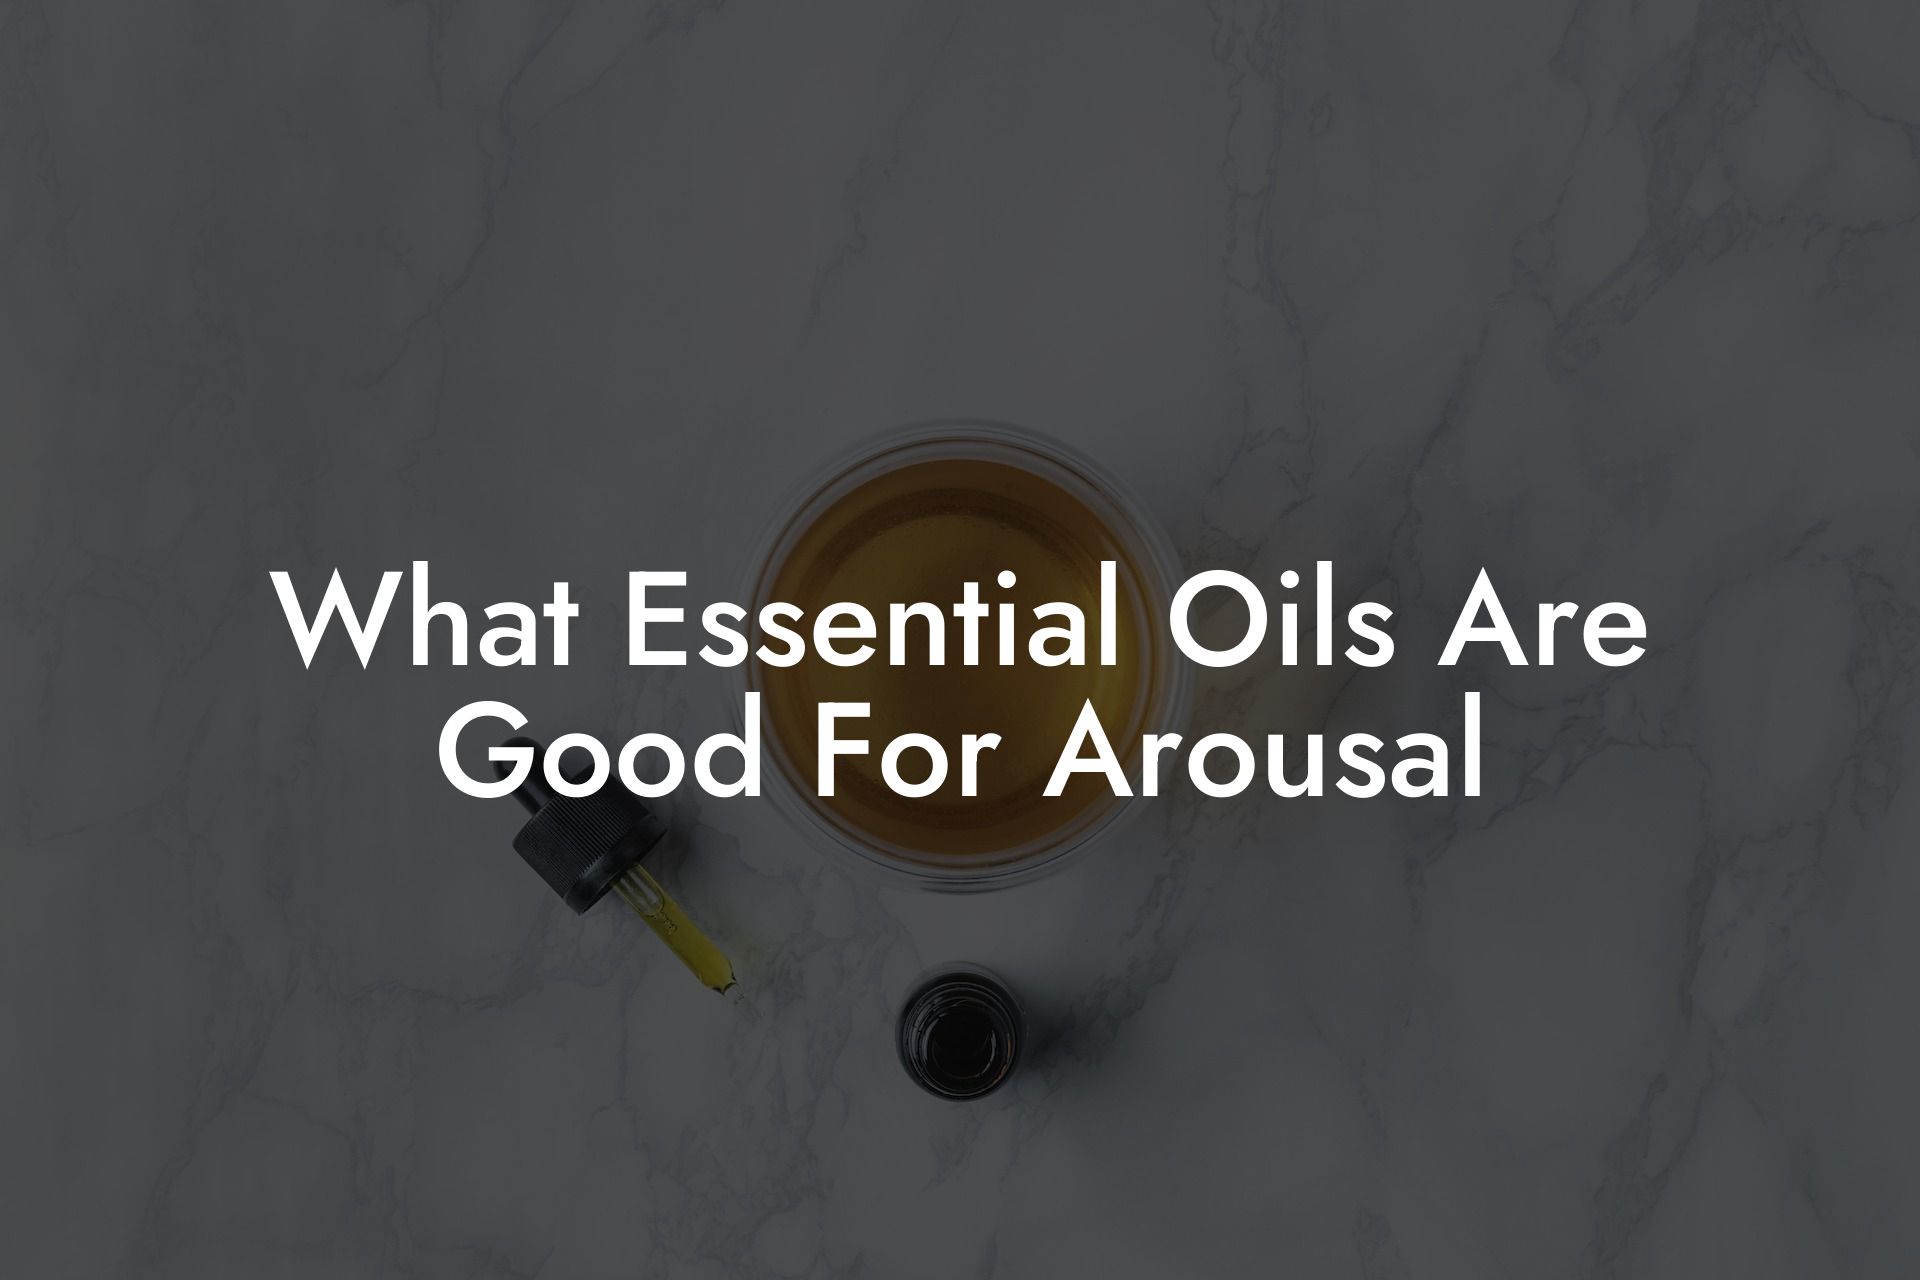 What Essential Oils Are Good For Arousal